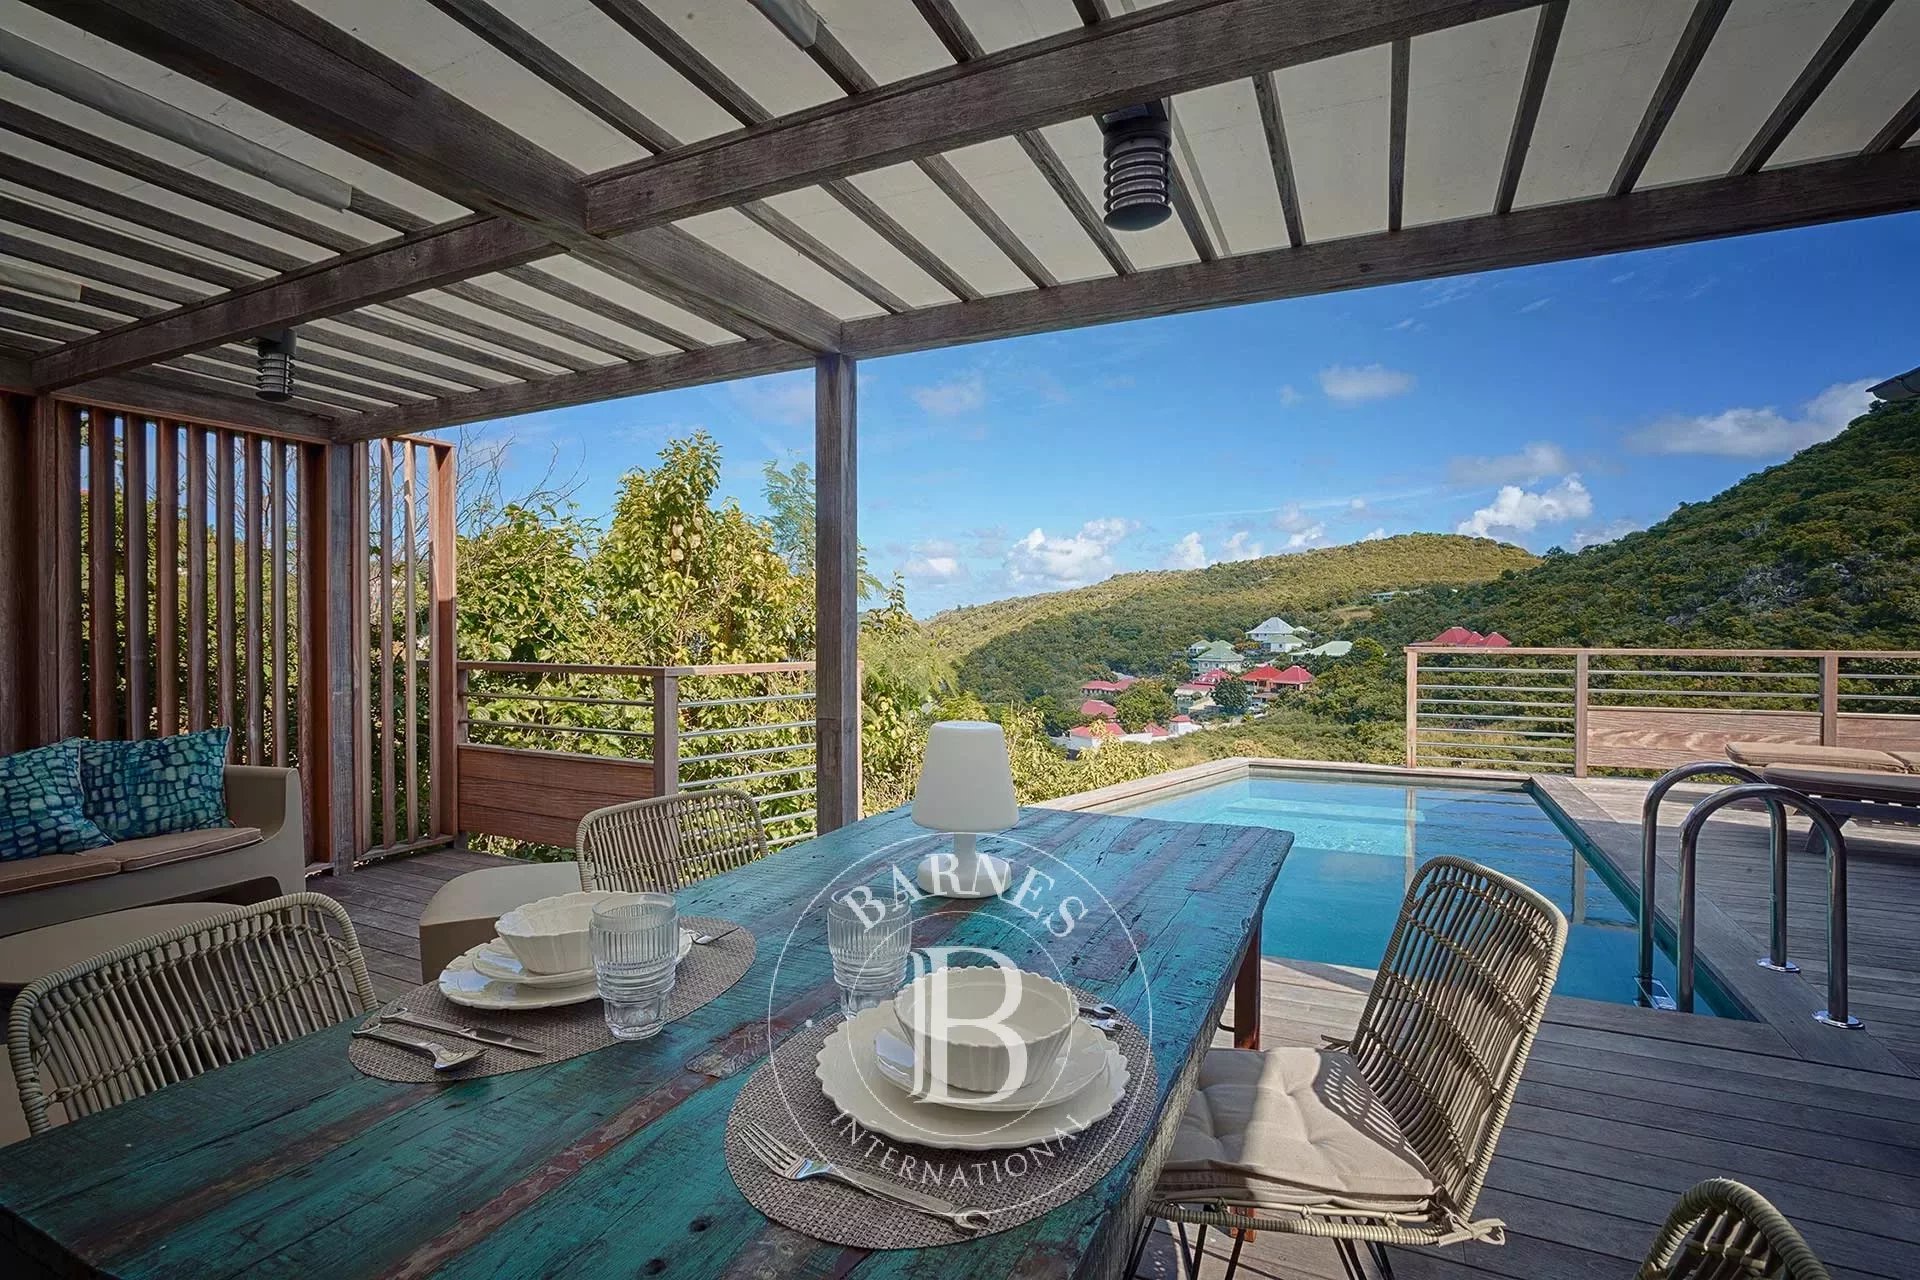 1-Bedroom Villa in St.Barths - picture 4 title=